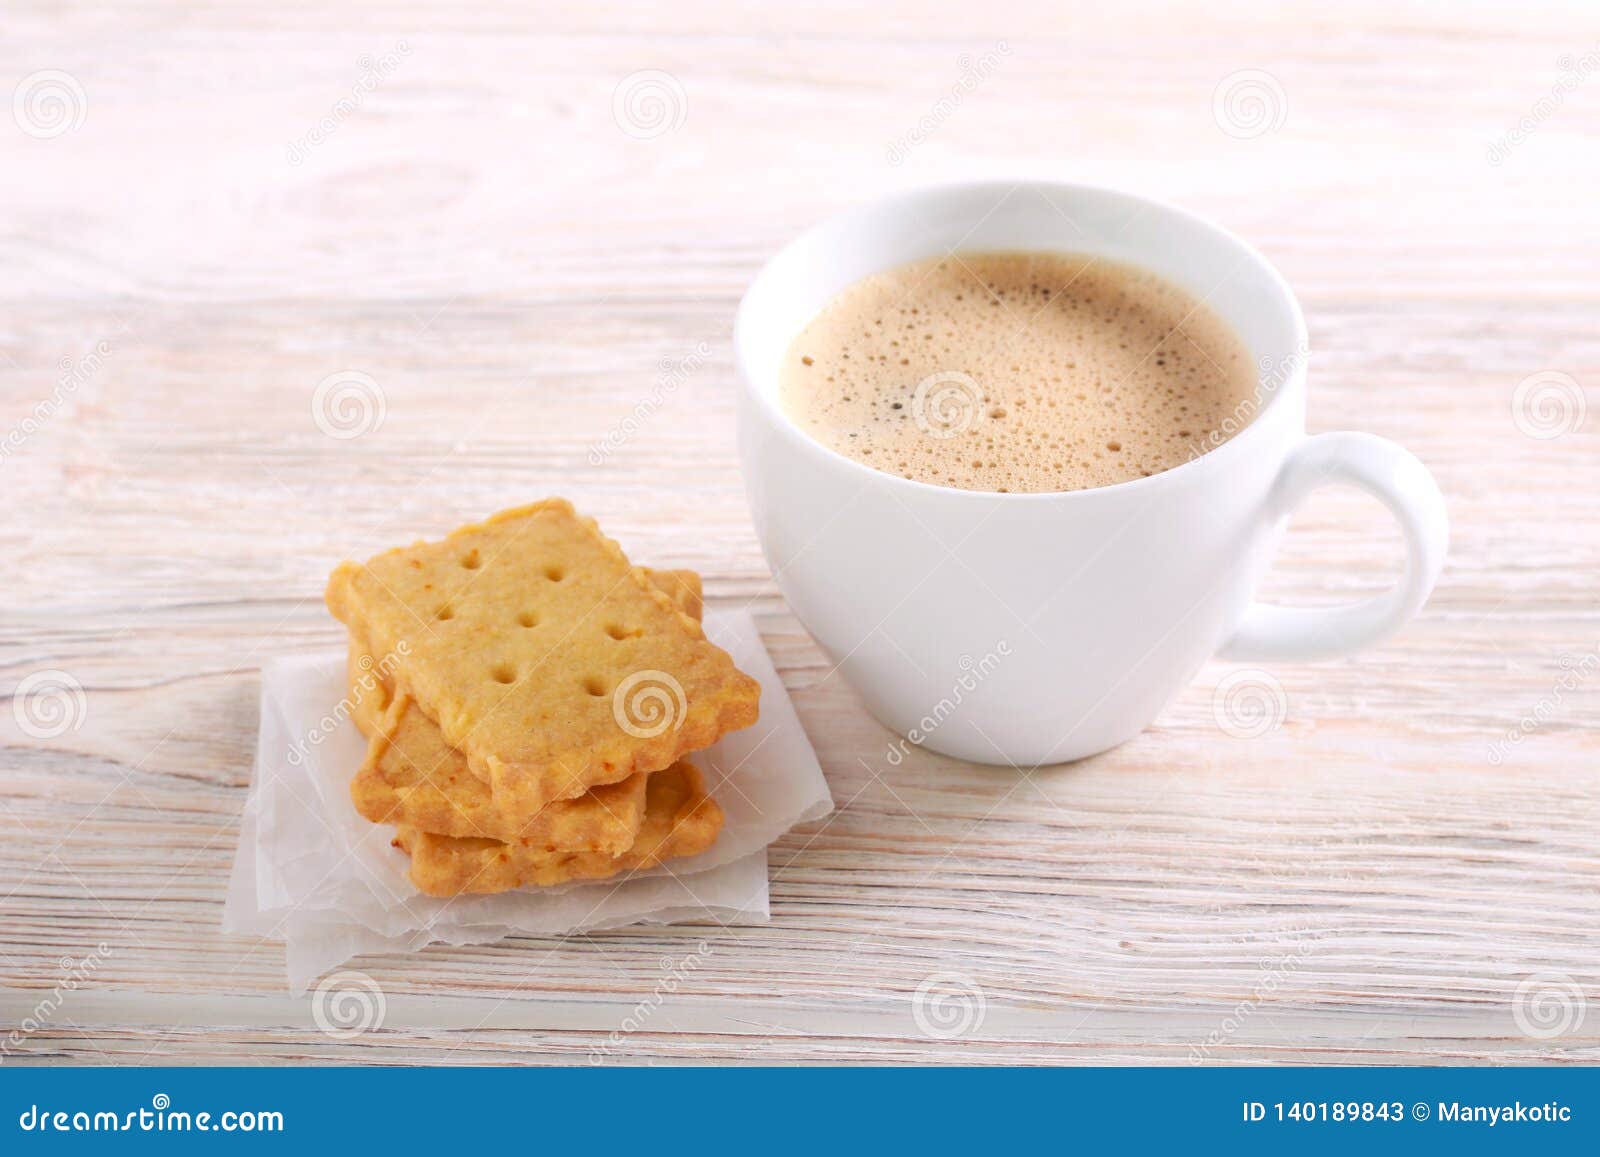 Homemade Crackers and Cup of Coffee Stock Image - Image of biscuits ...